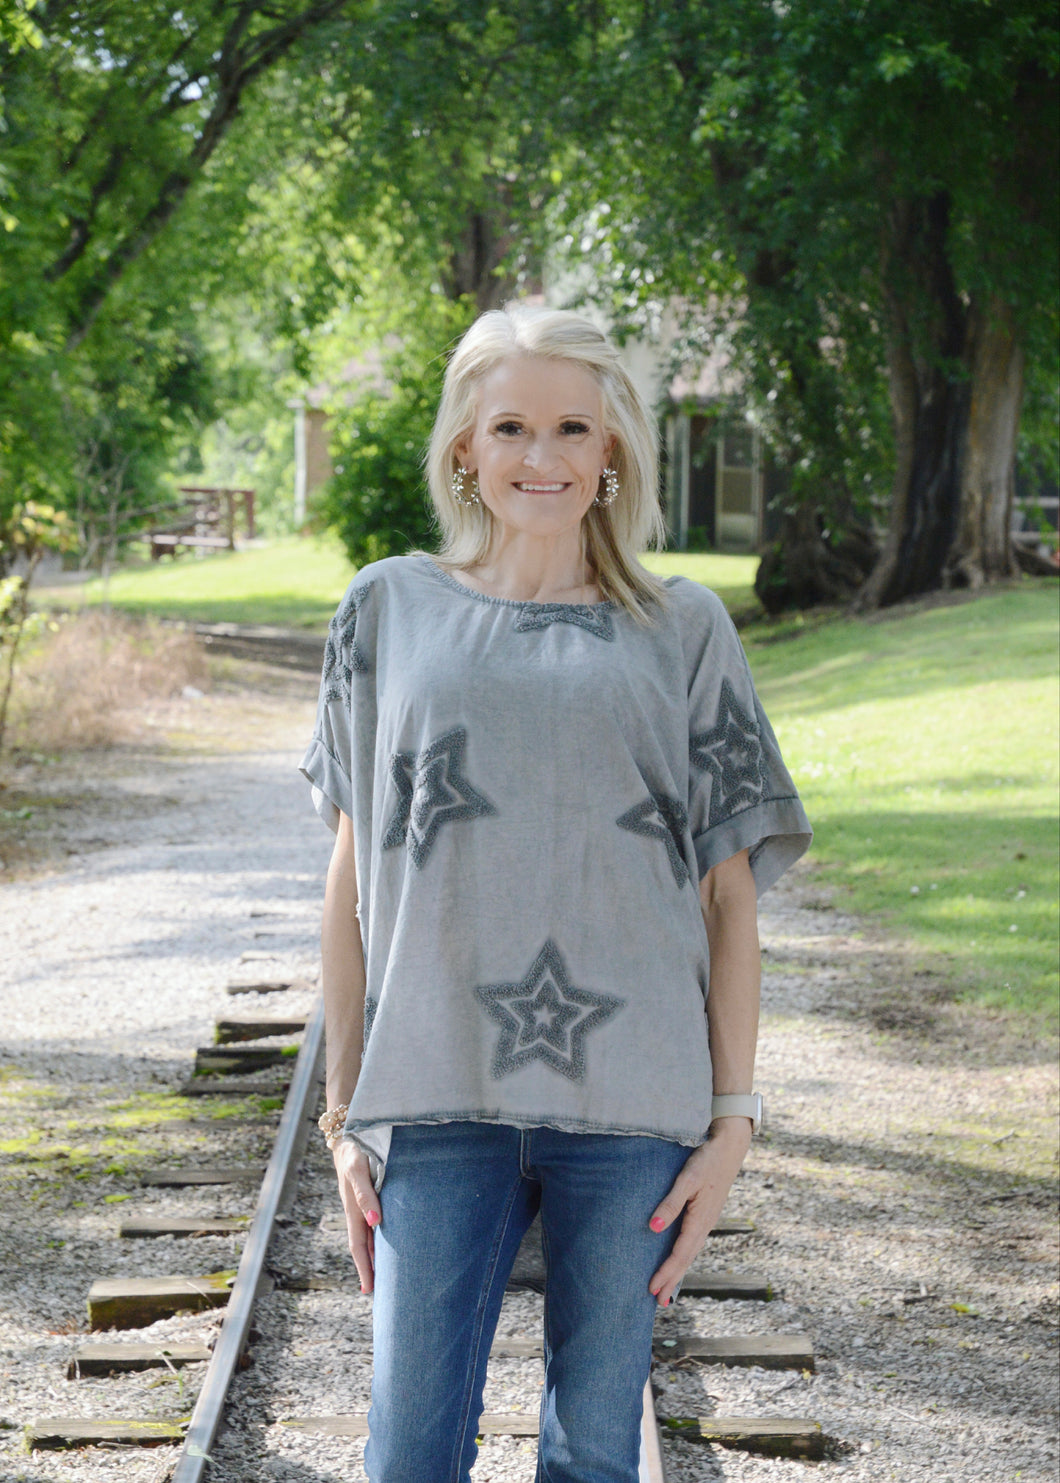 Yolly Textured Star Top in Charcoal Shirts & Tops Yolly   